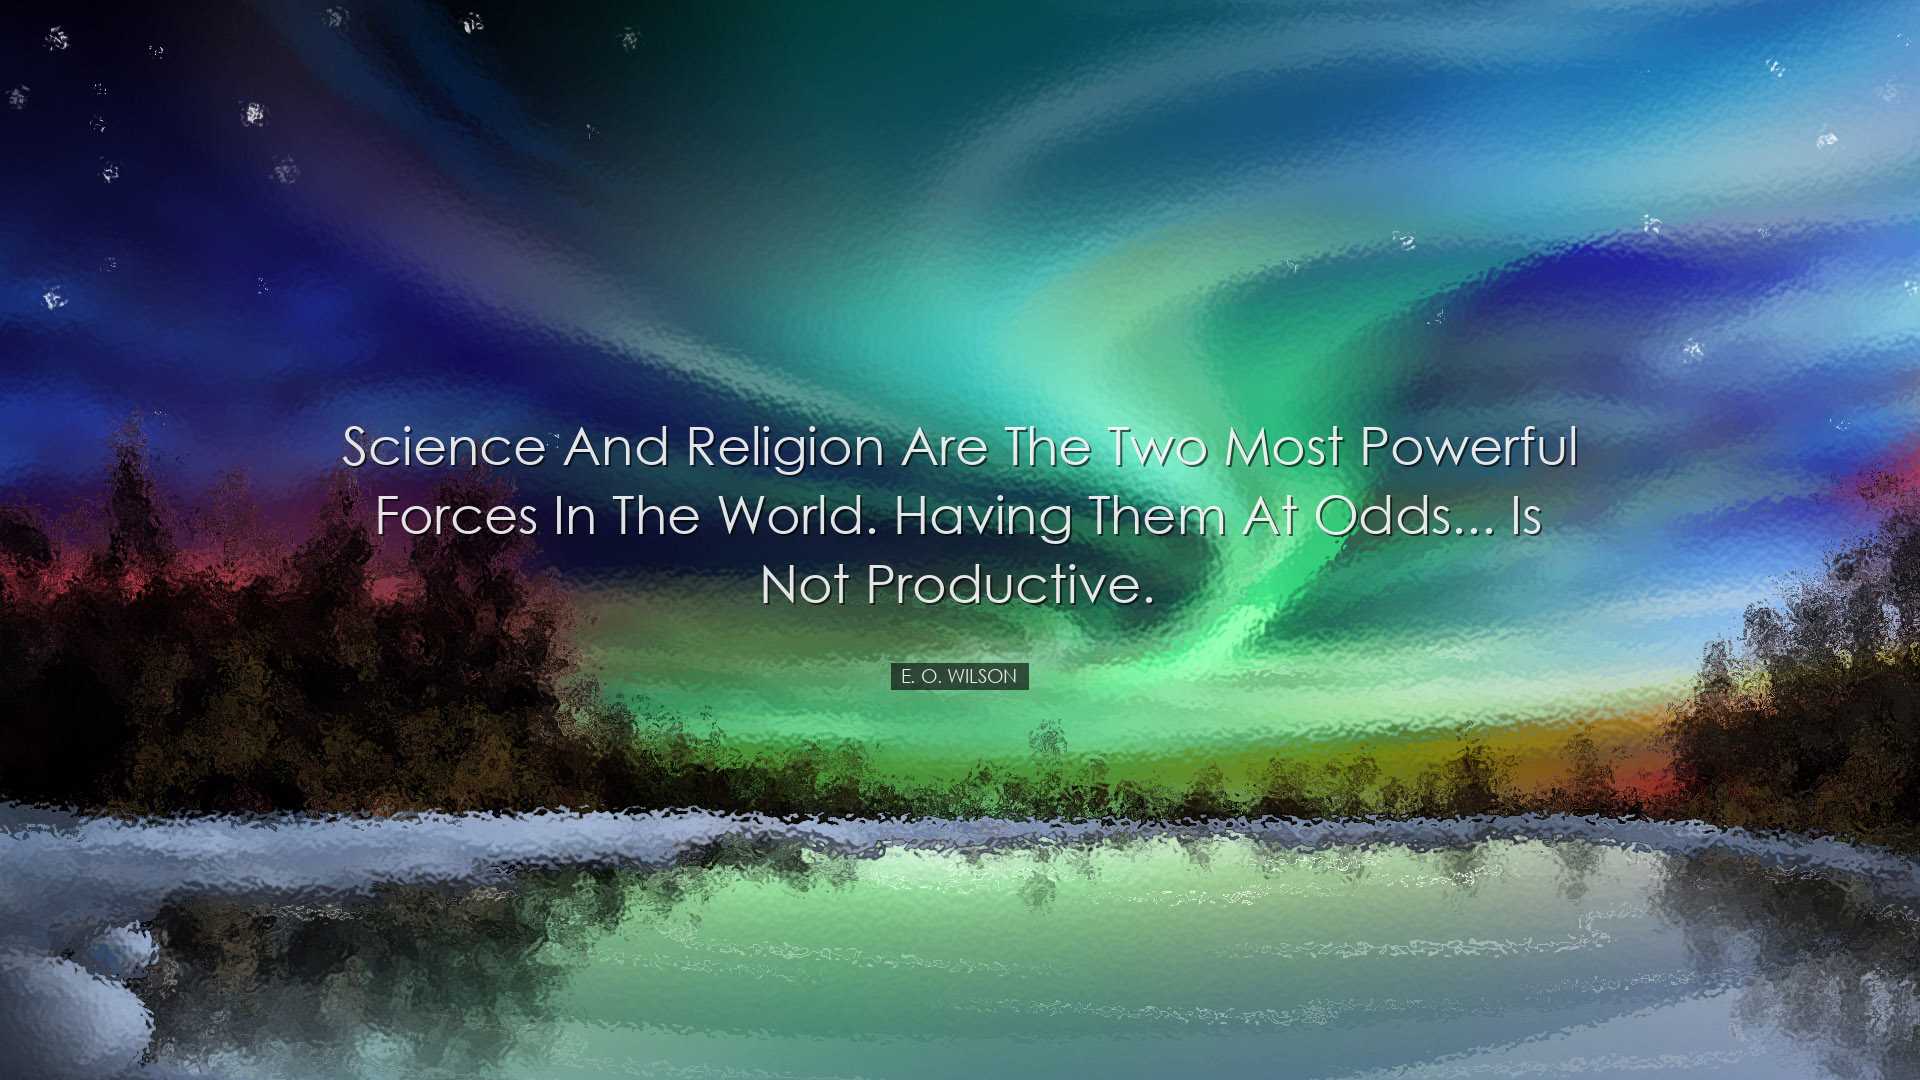 Science and religion are the two most powerful forces in the world